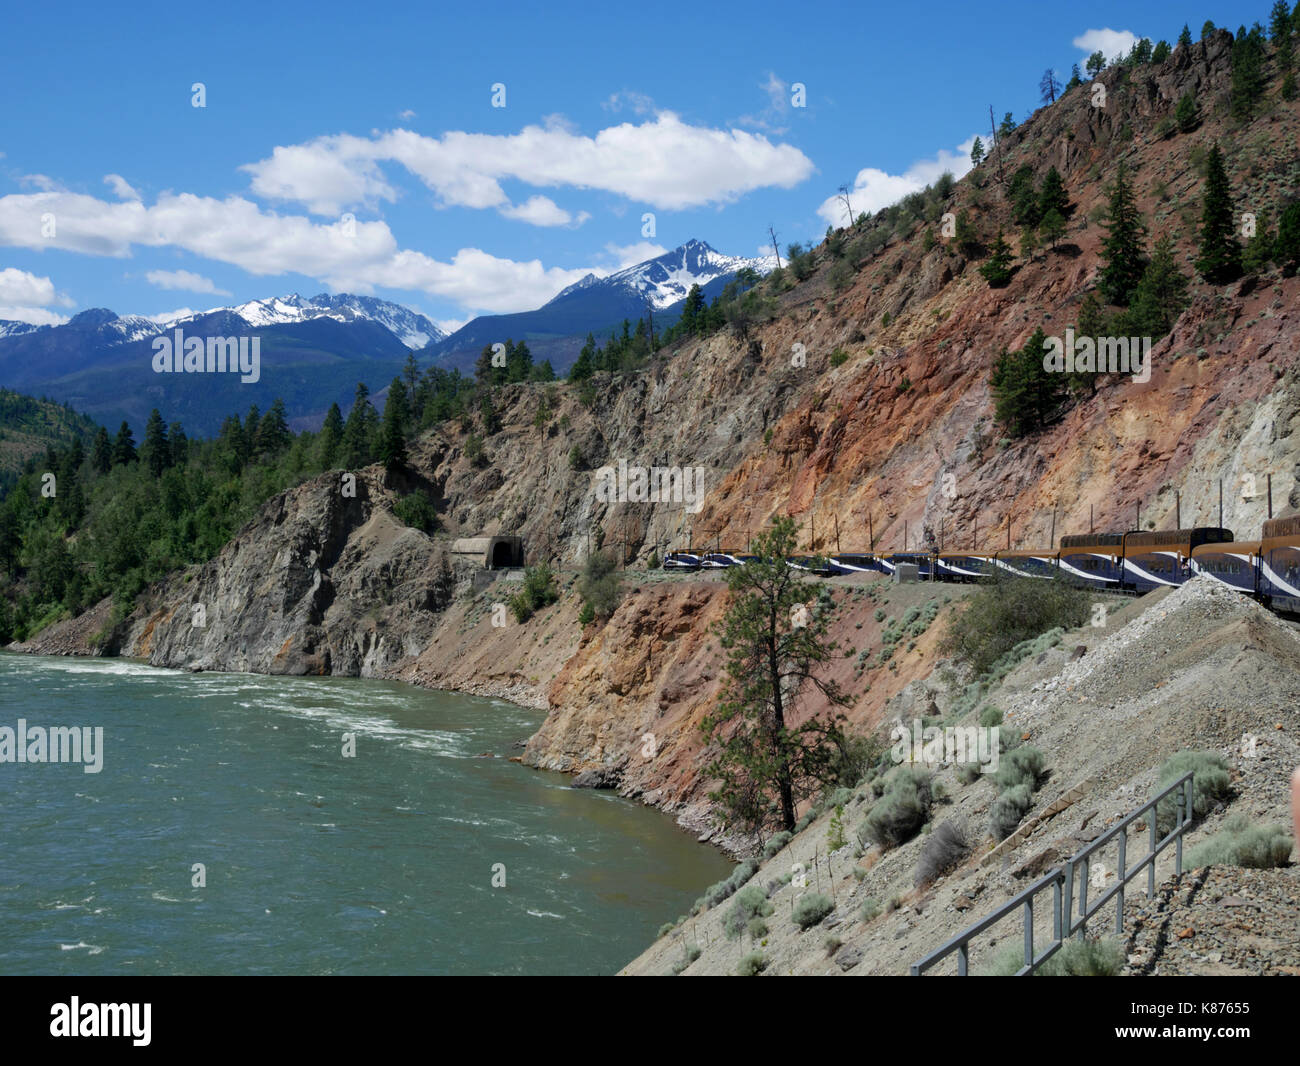 The Rocky Mountaineer passes through Rainbow Canyon beside the Thompson River heading from Kamloops to Vancouver. Stock Photo